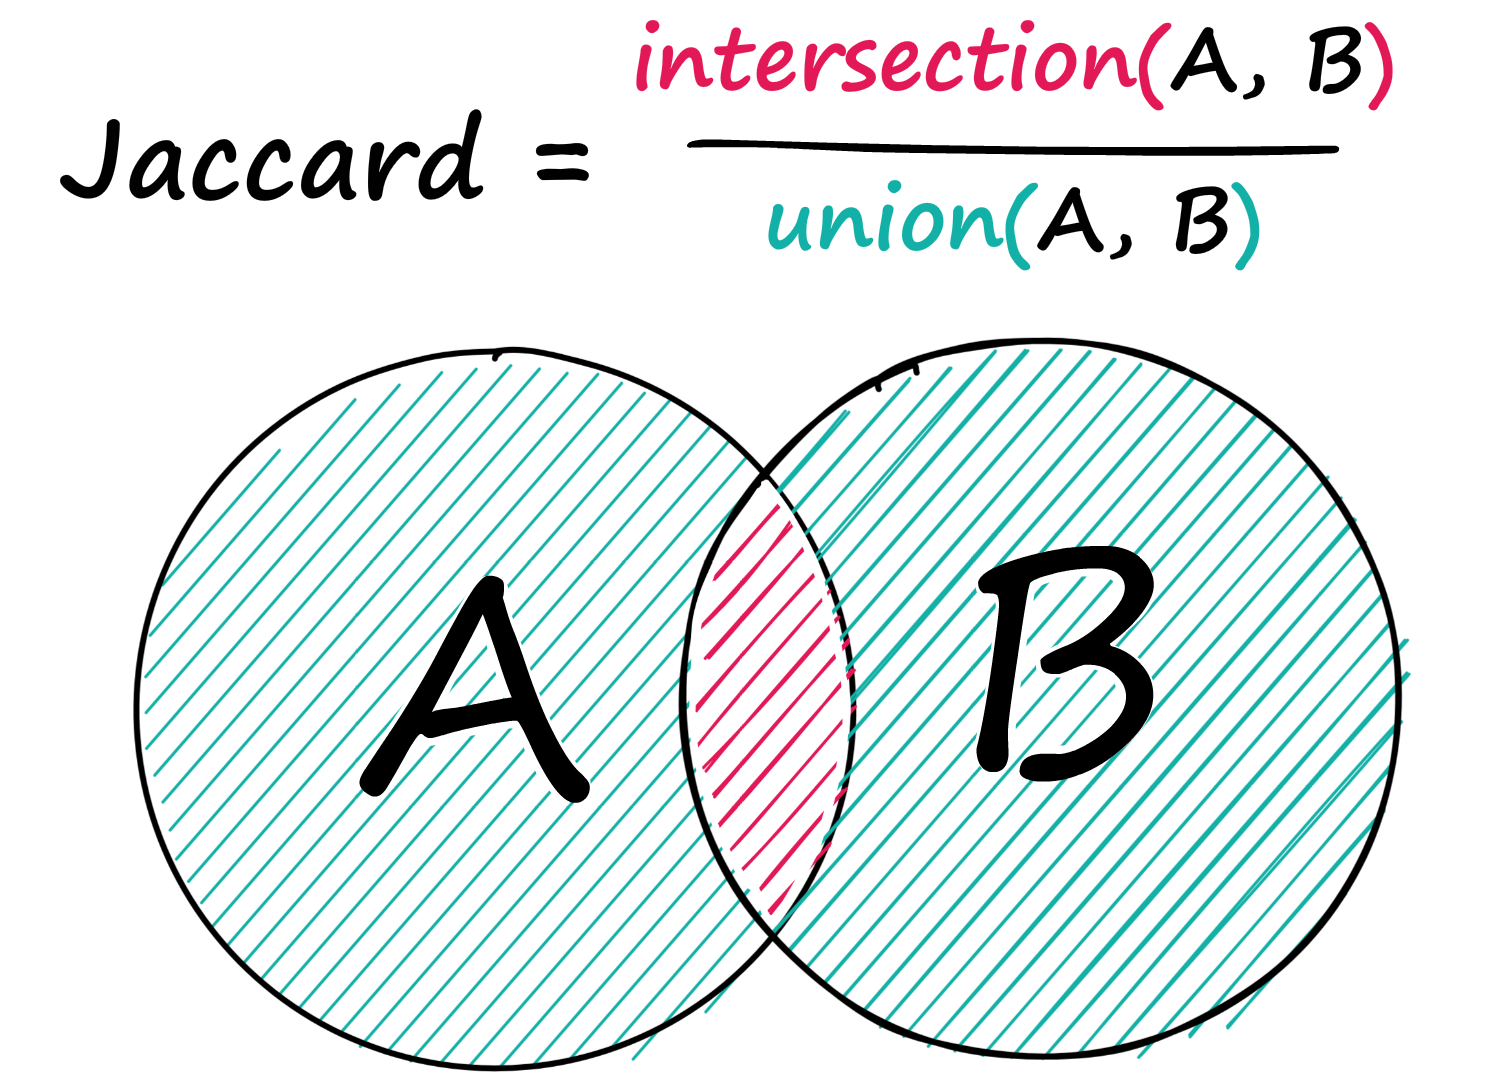 Jaccard similarity measures the intersection between two sequences over the union between the two sequences.